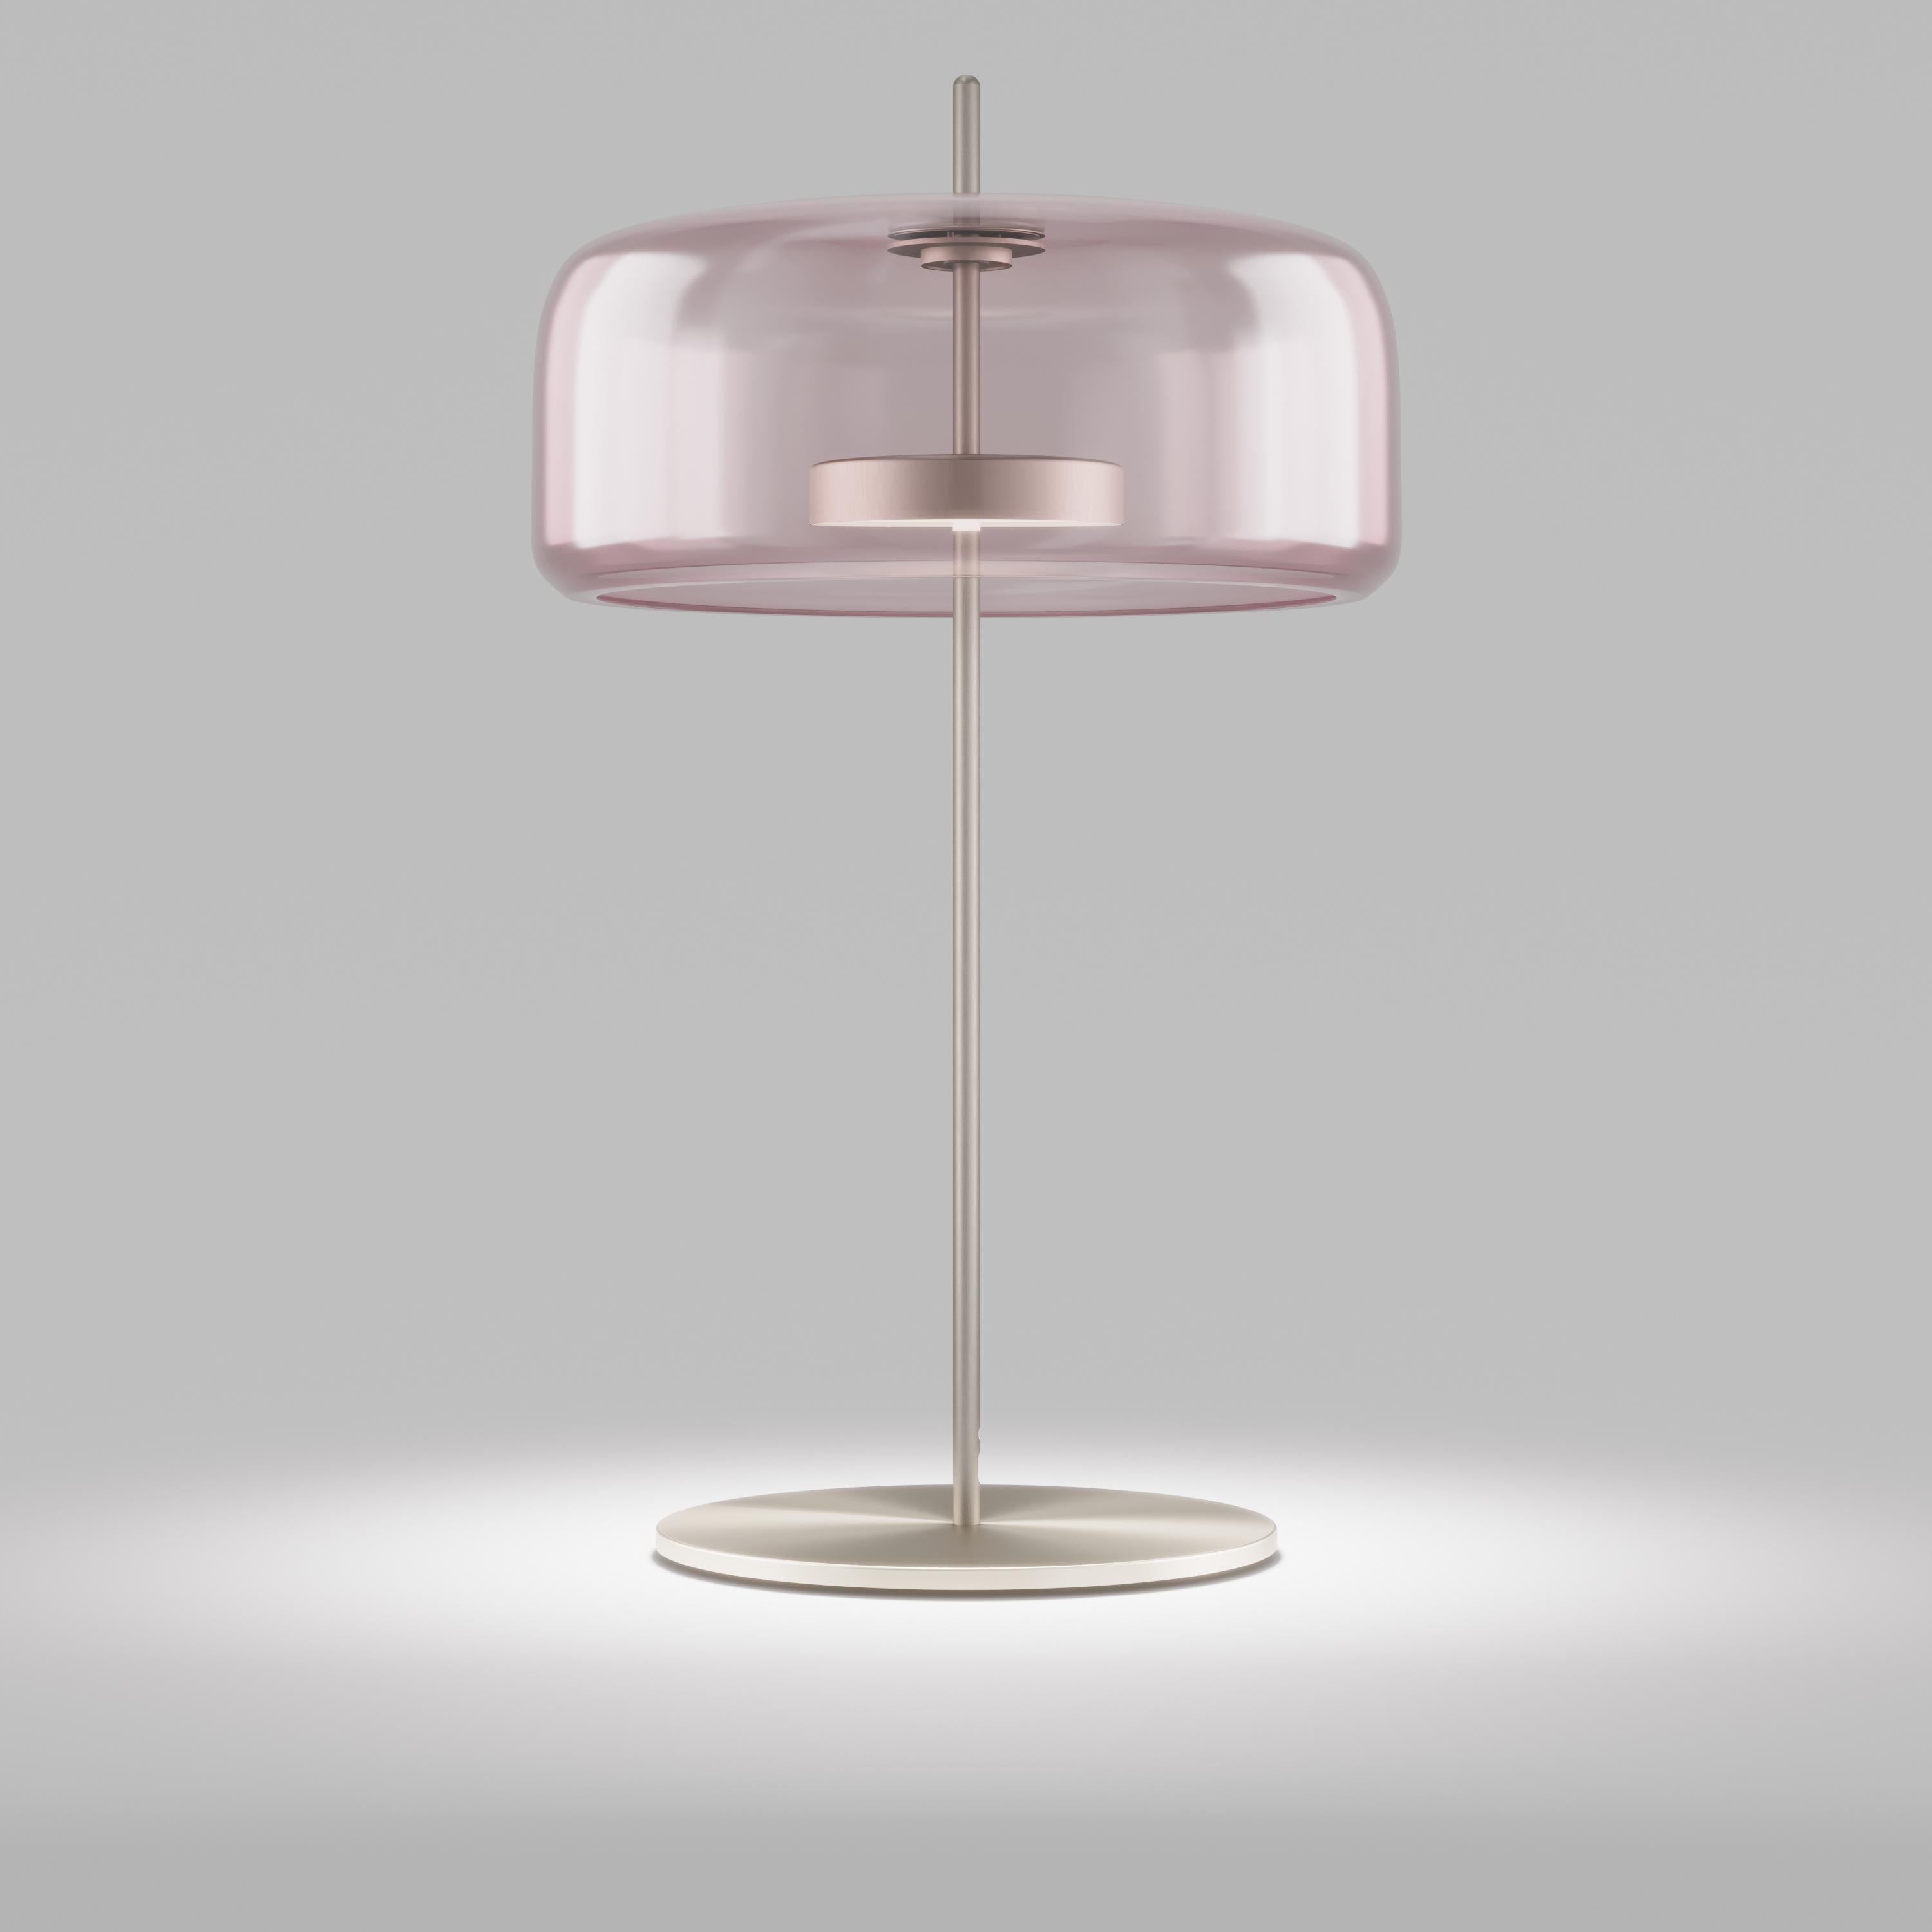 The elegant and delicate look of the blown glass finds a new dimension in Jube. Two glass units placed side by side, so perfectly assembled, that they look like a unique piece. A sinuous lamp, with tone-on-tone colours that give it a precious,